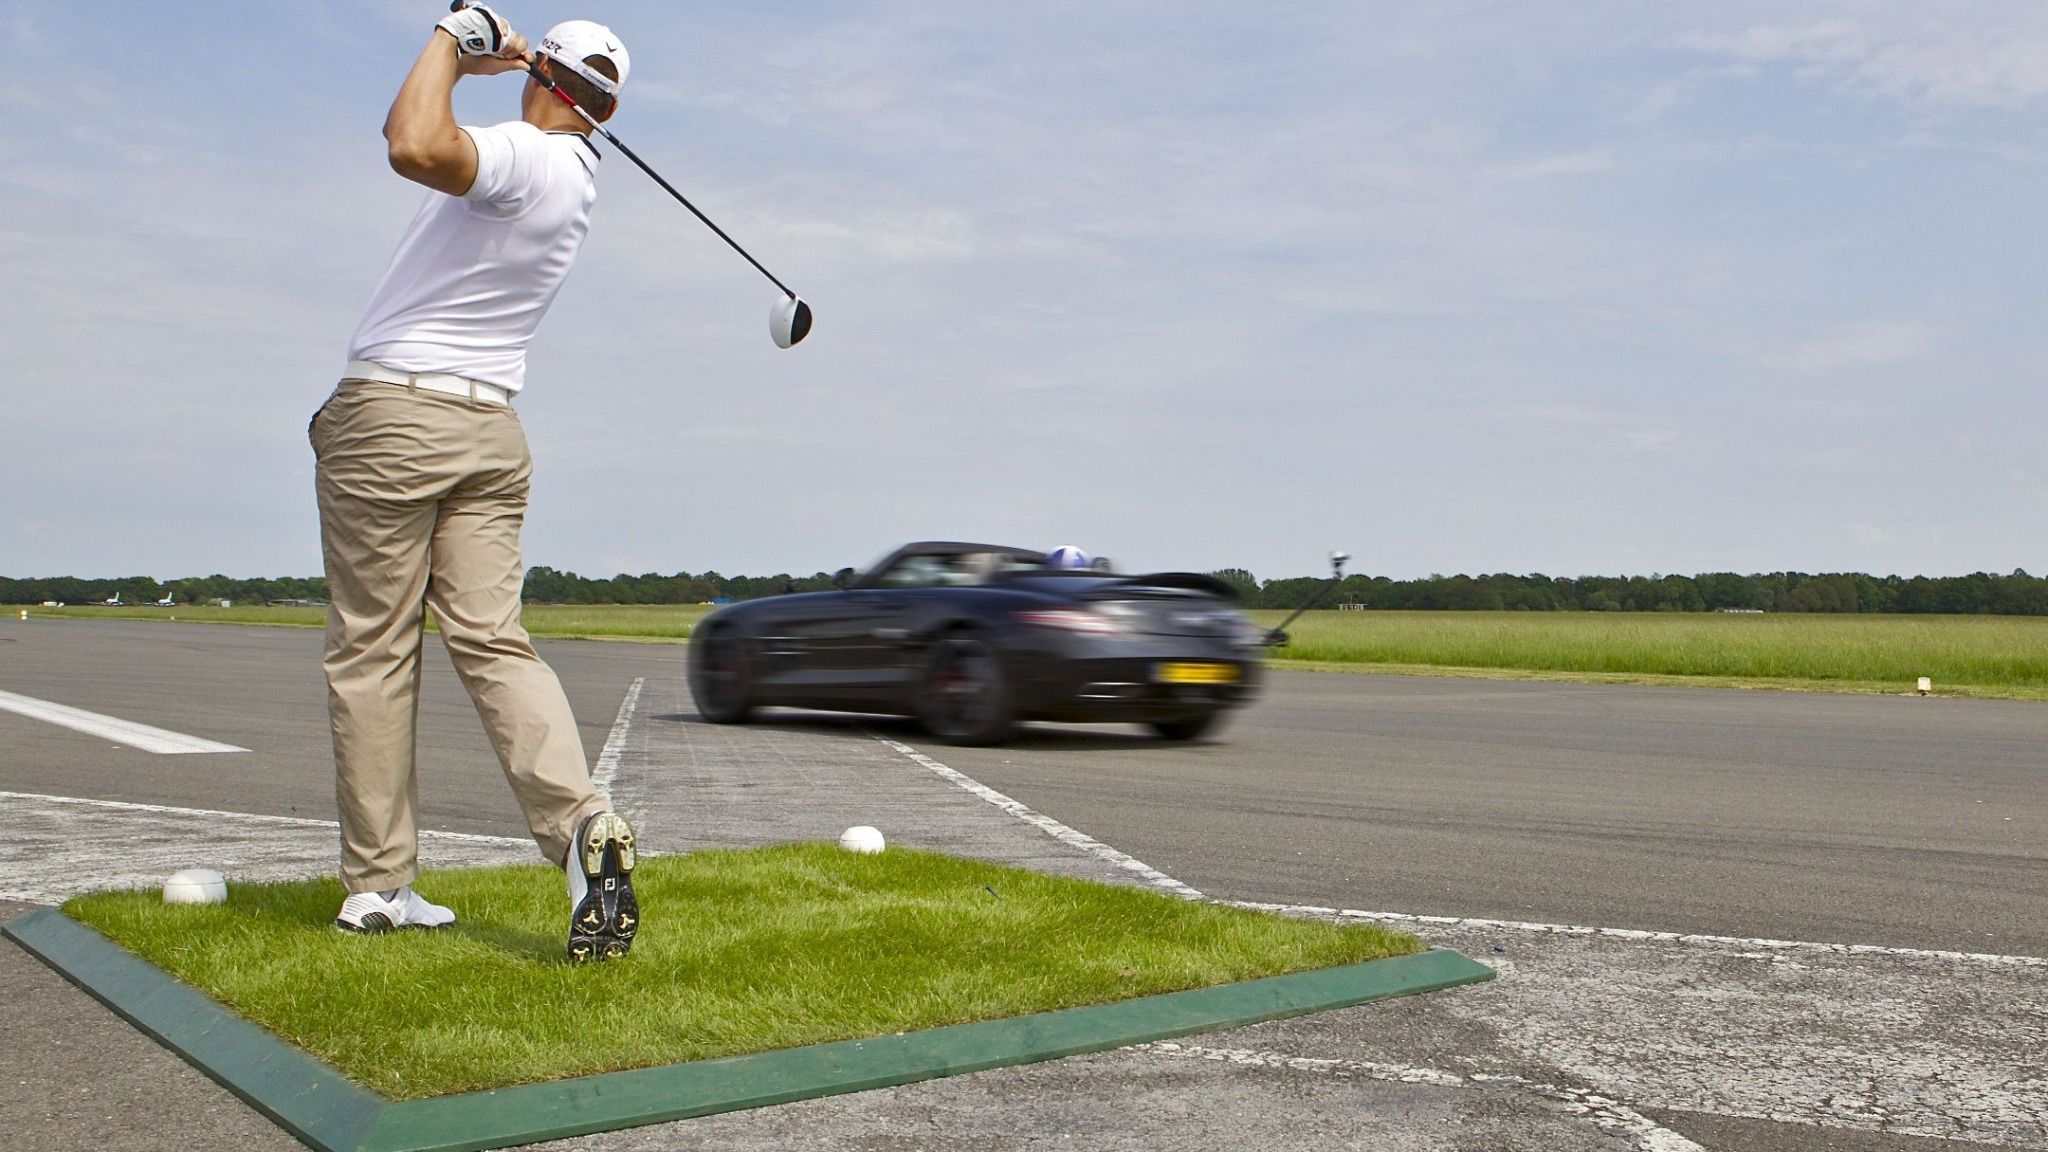 Man playing golf by the side of a race track